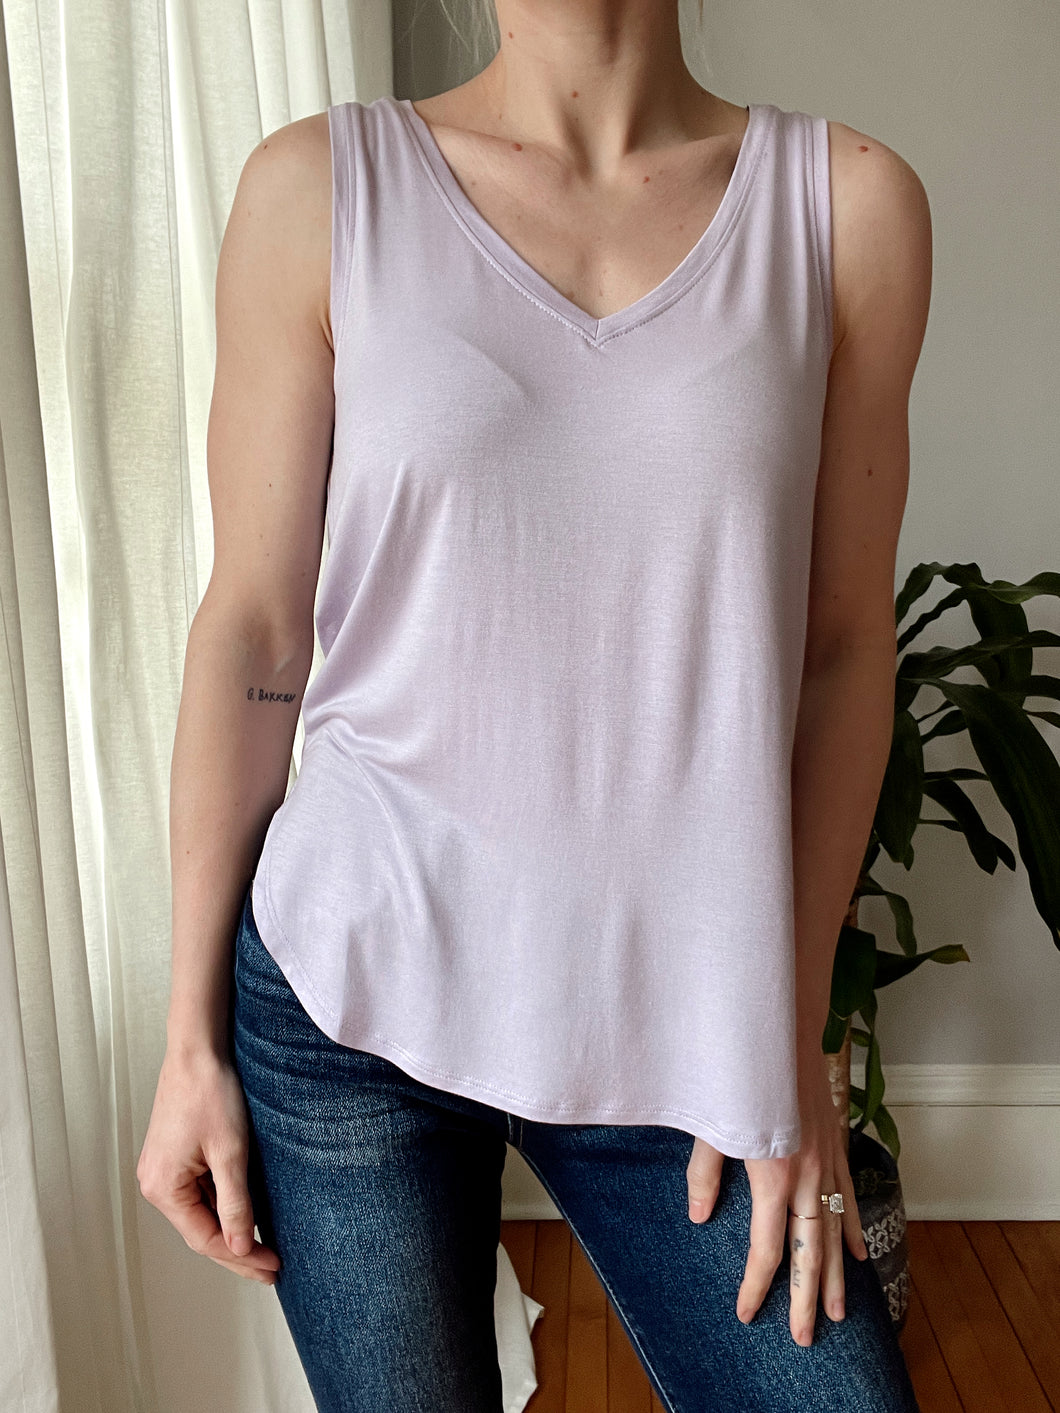 Call Me Yours V-Neck Tank Top - 3 Colors Available